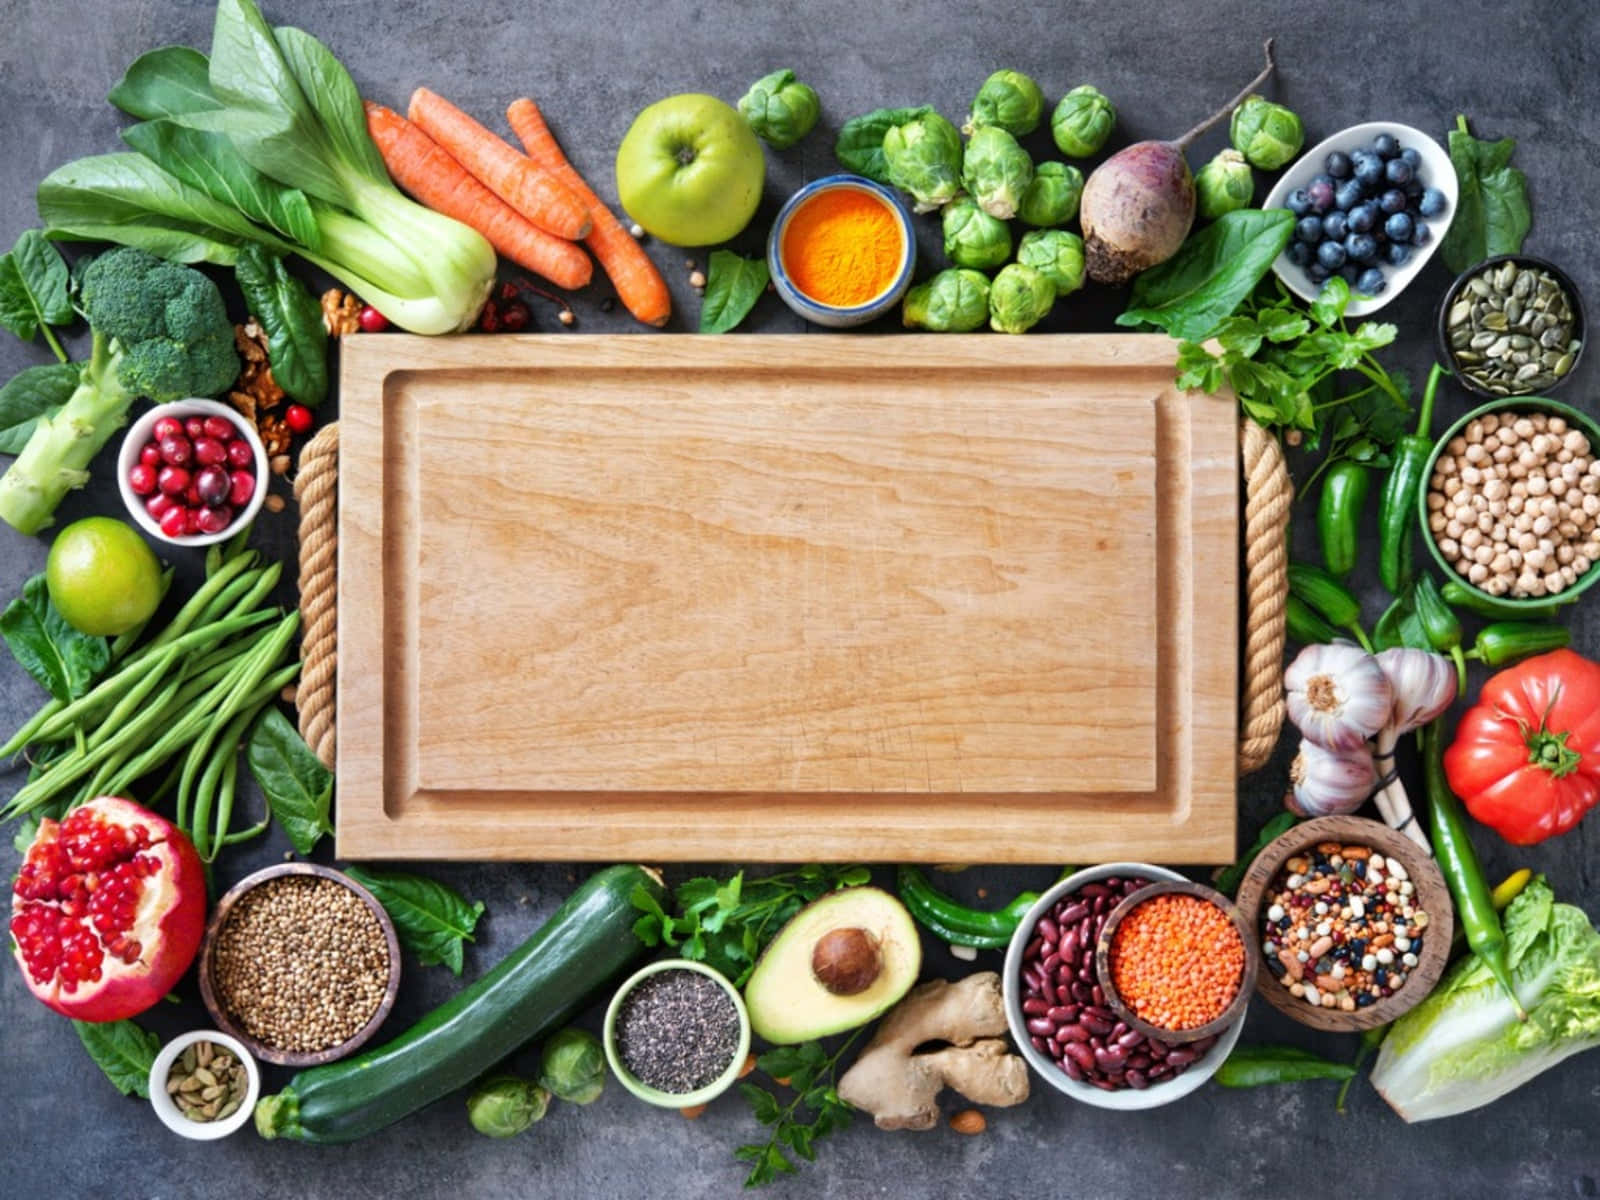 A Cutting Board With Vegetables And Fruits On It